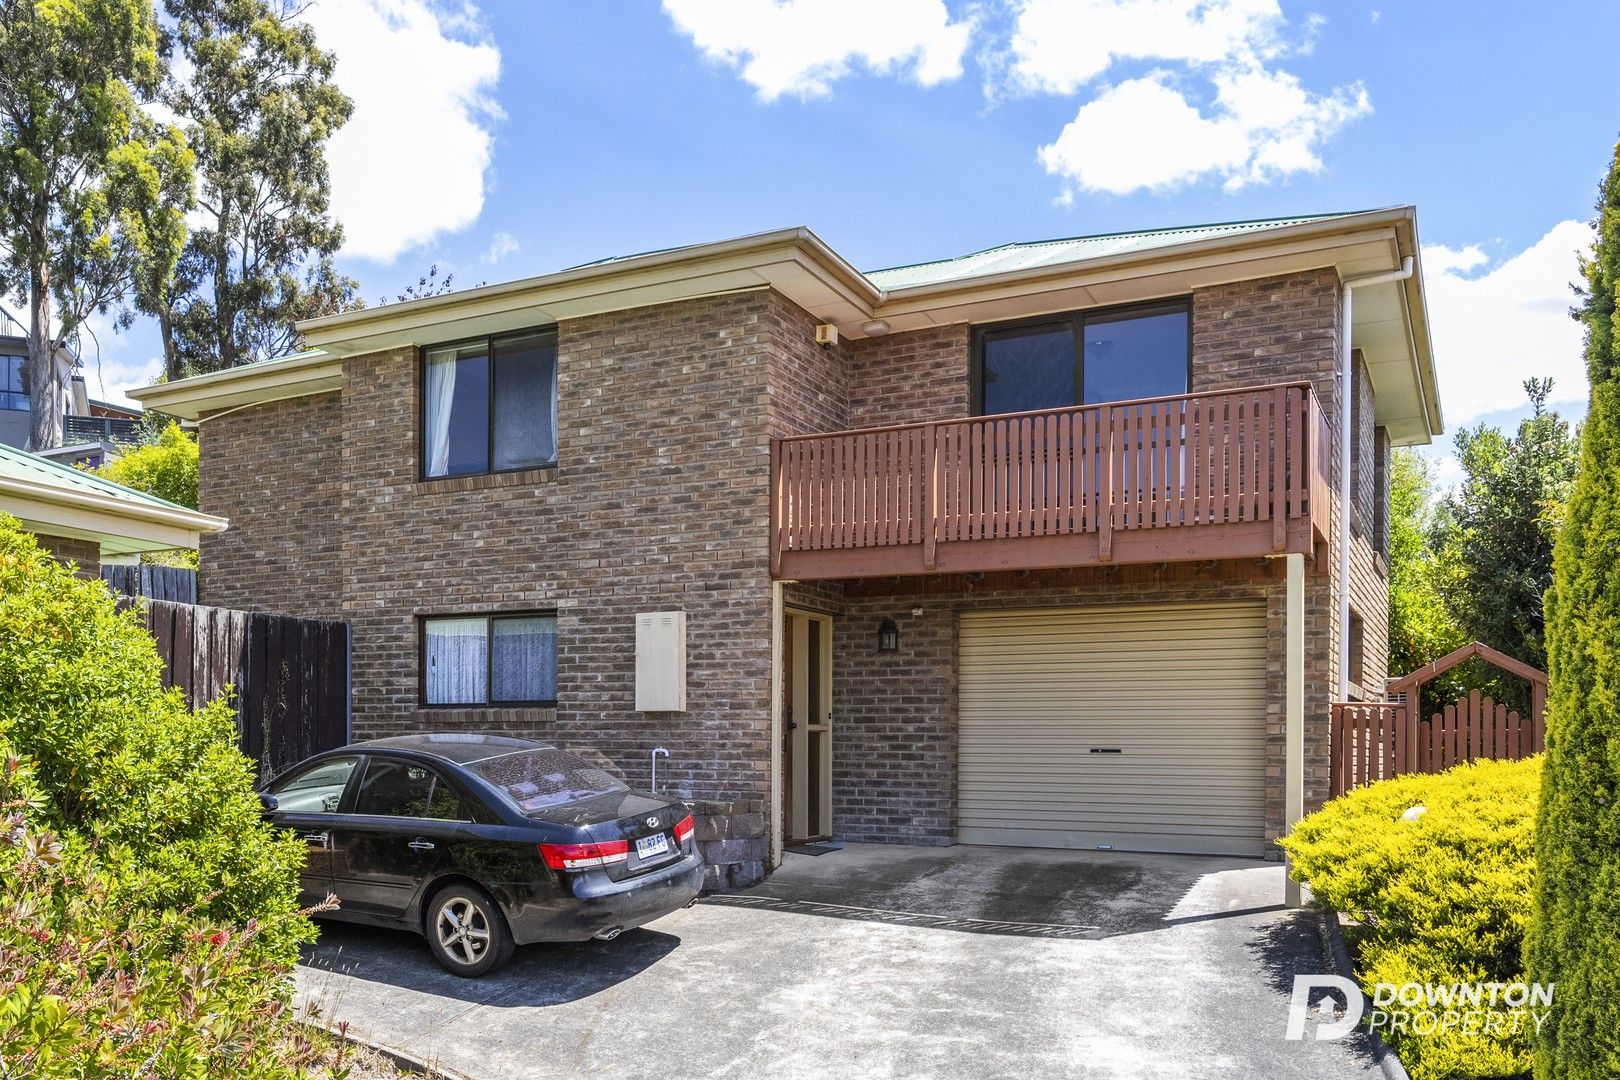 3 bedrooms Townhouse in 2/10 Donald Court GLENORCHY TAS, 7010